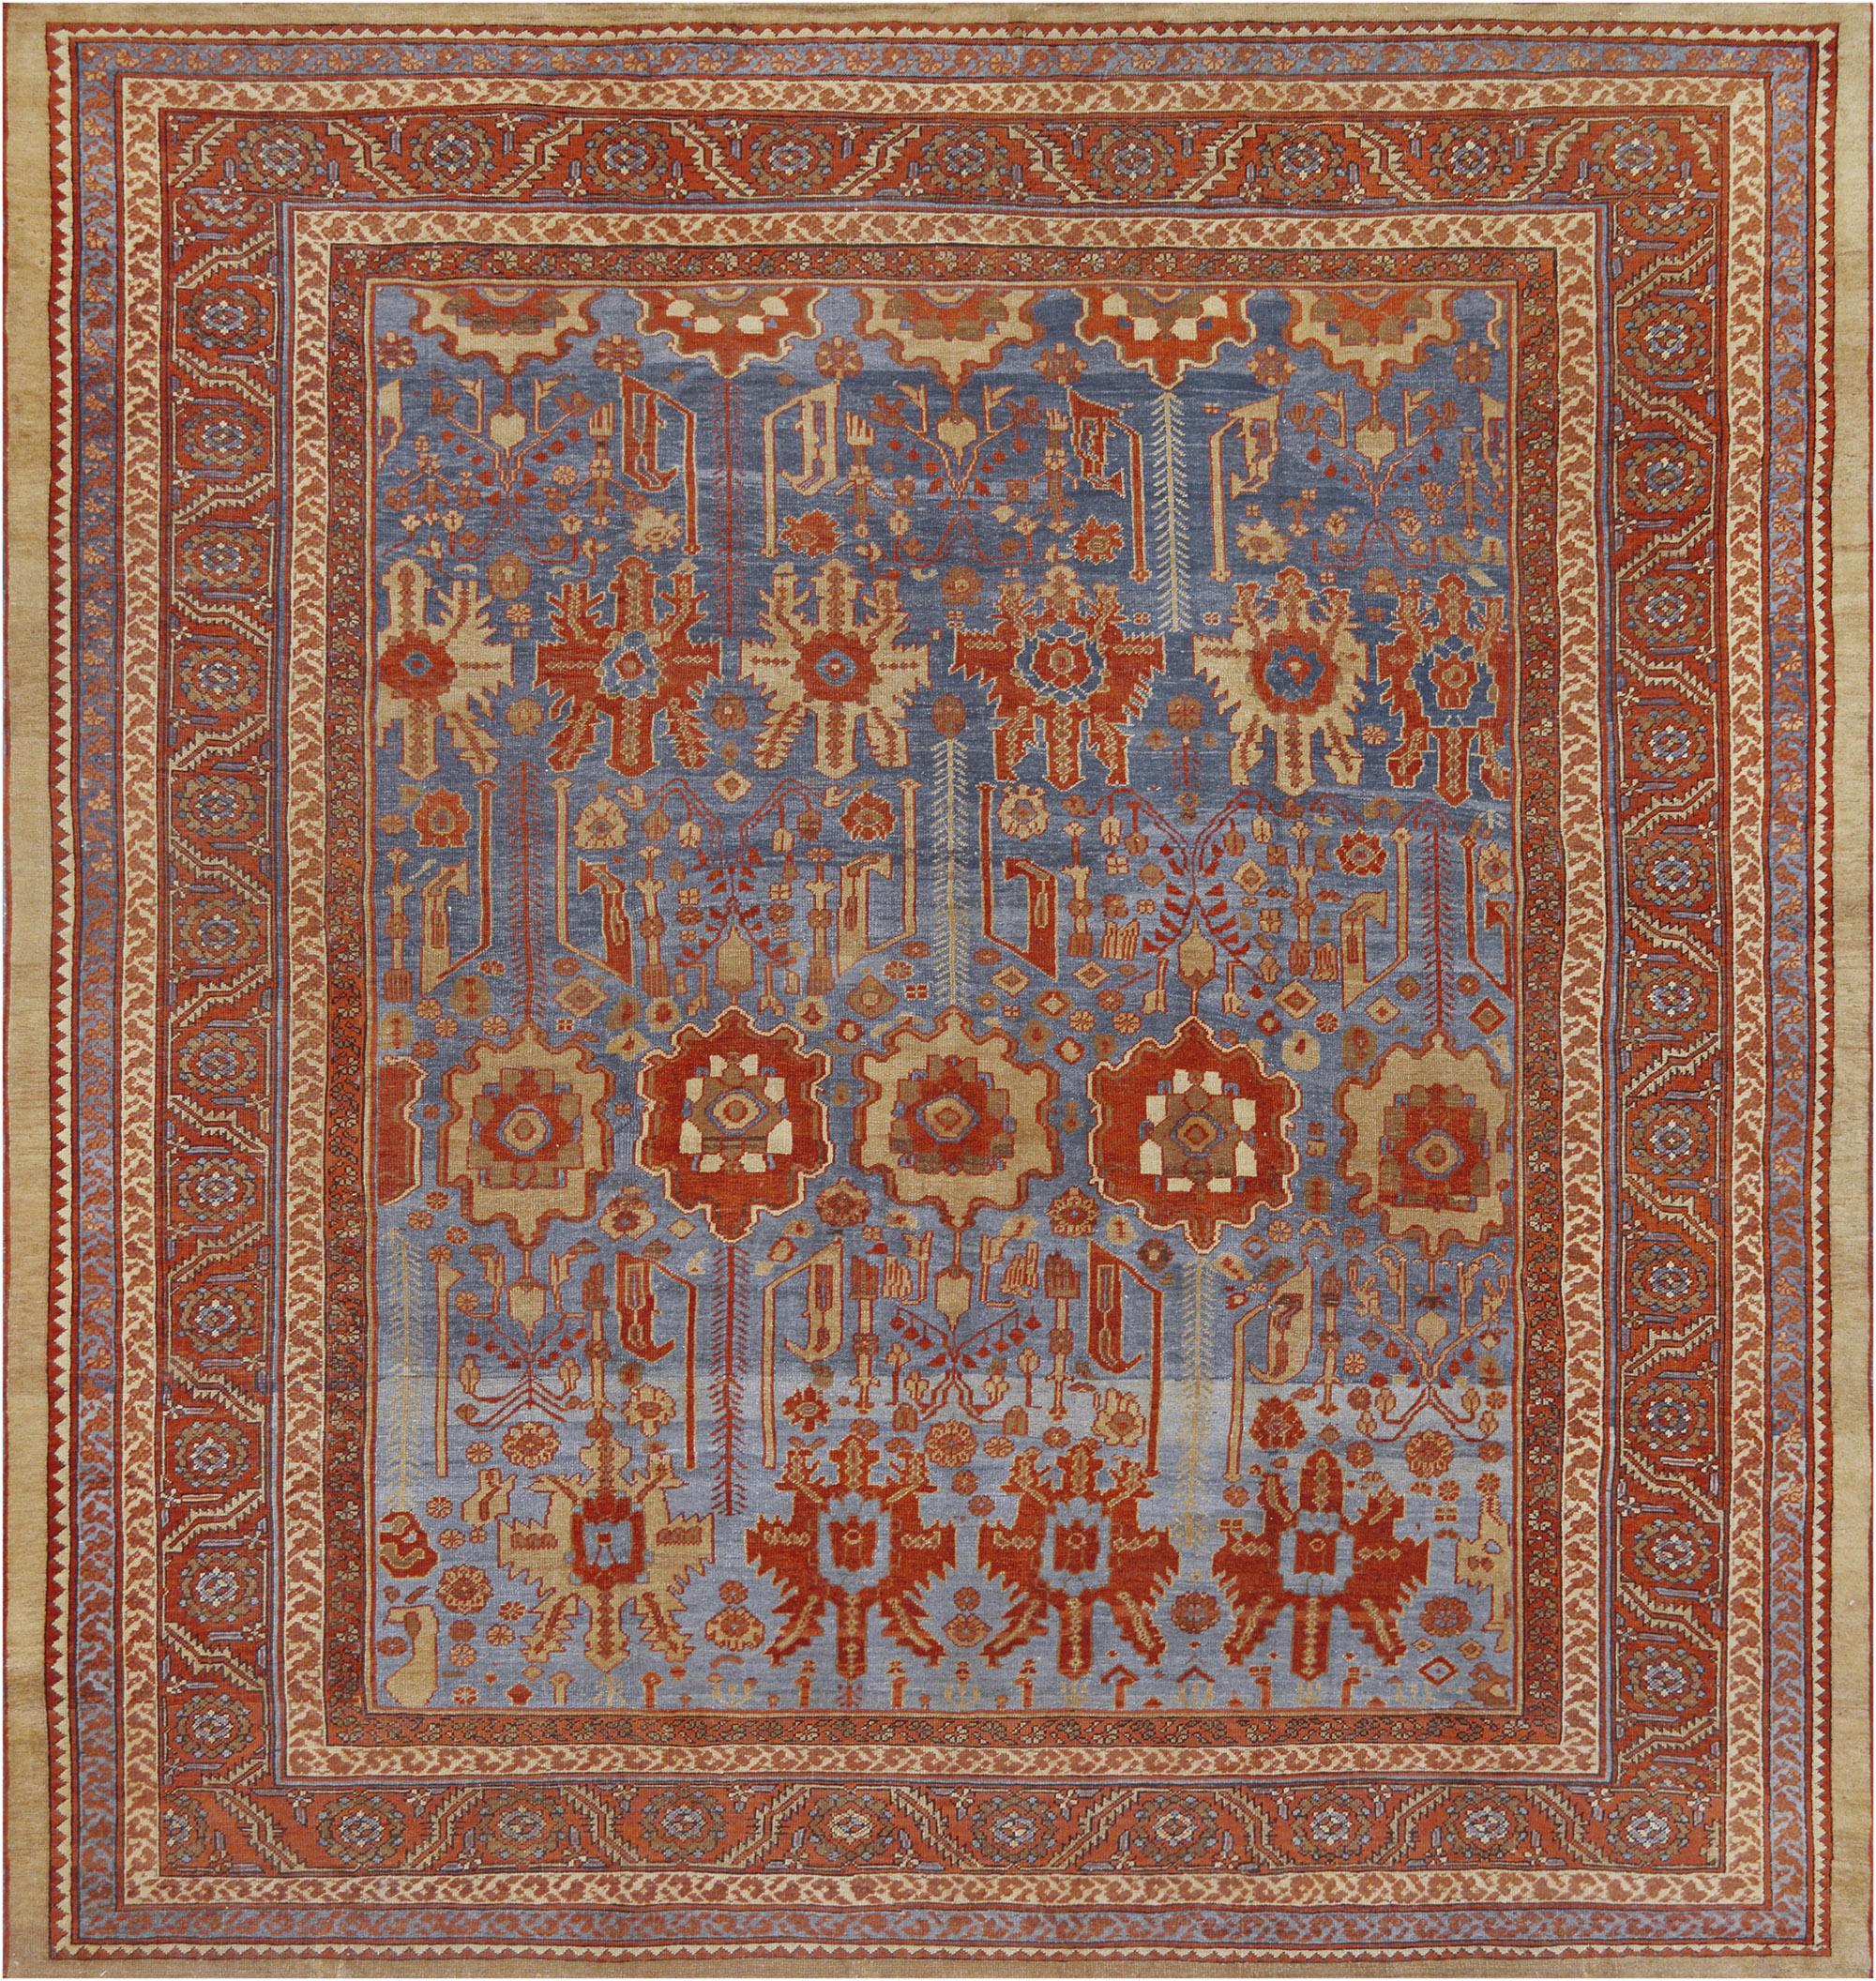 Persian Hand-Woven Late 19th Century Wool Bakhshaish Rug from North West Persia For Sale